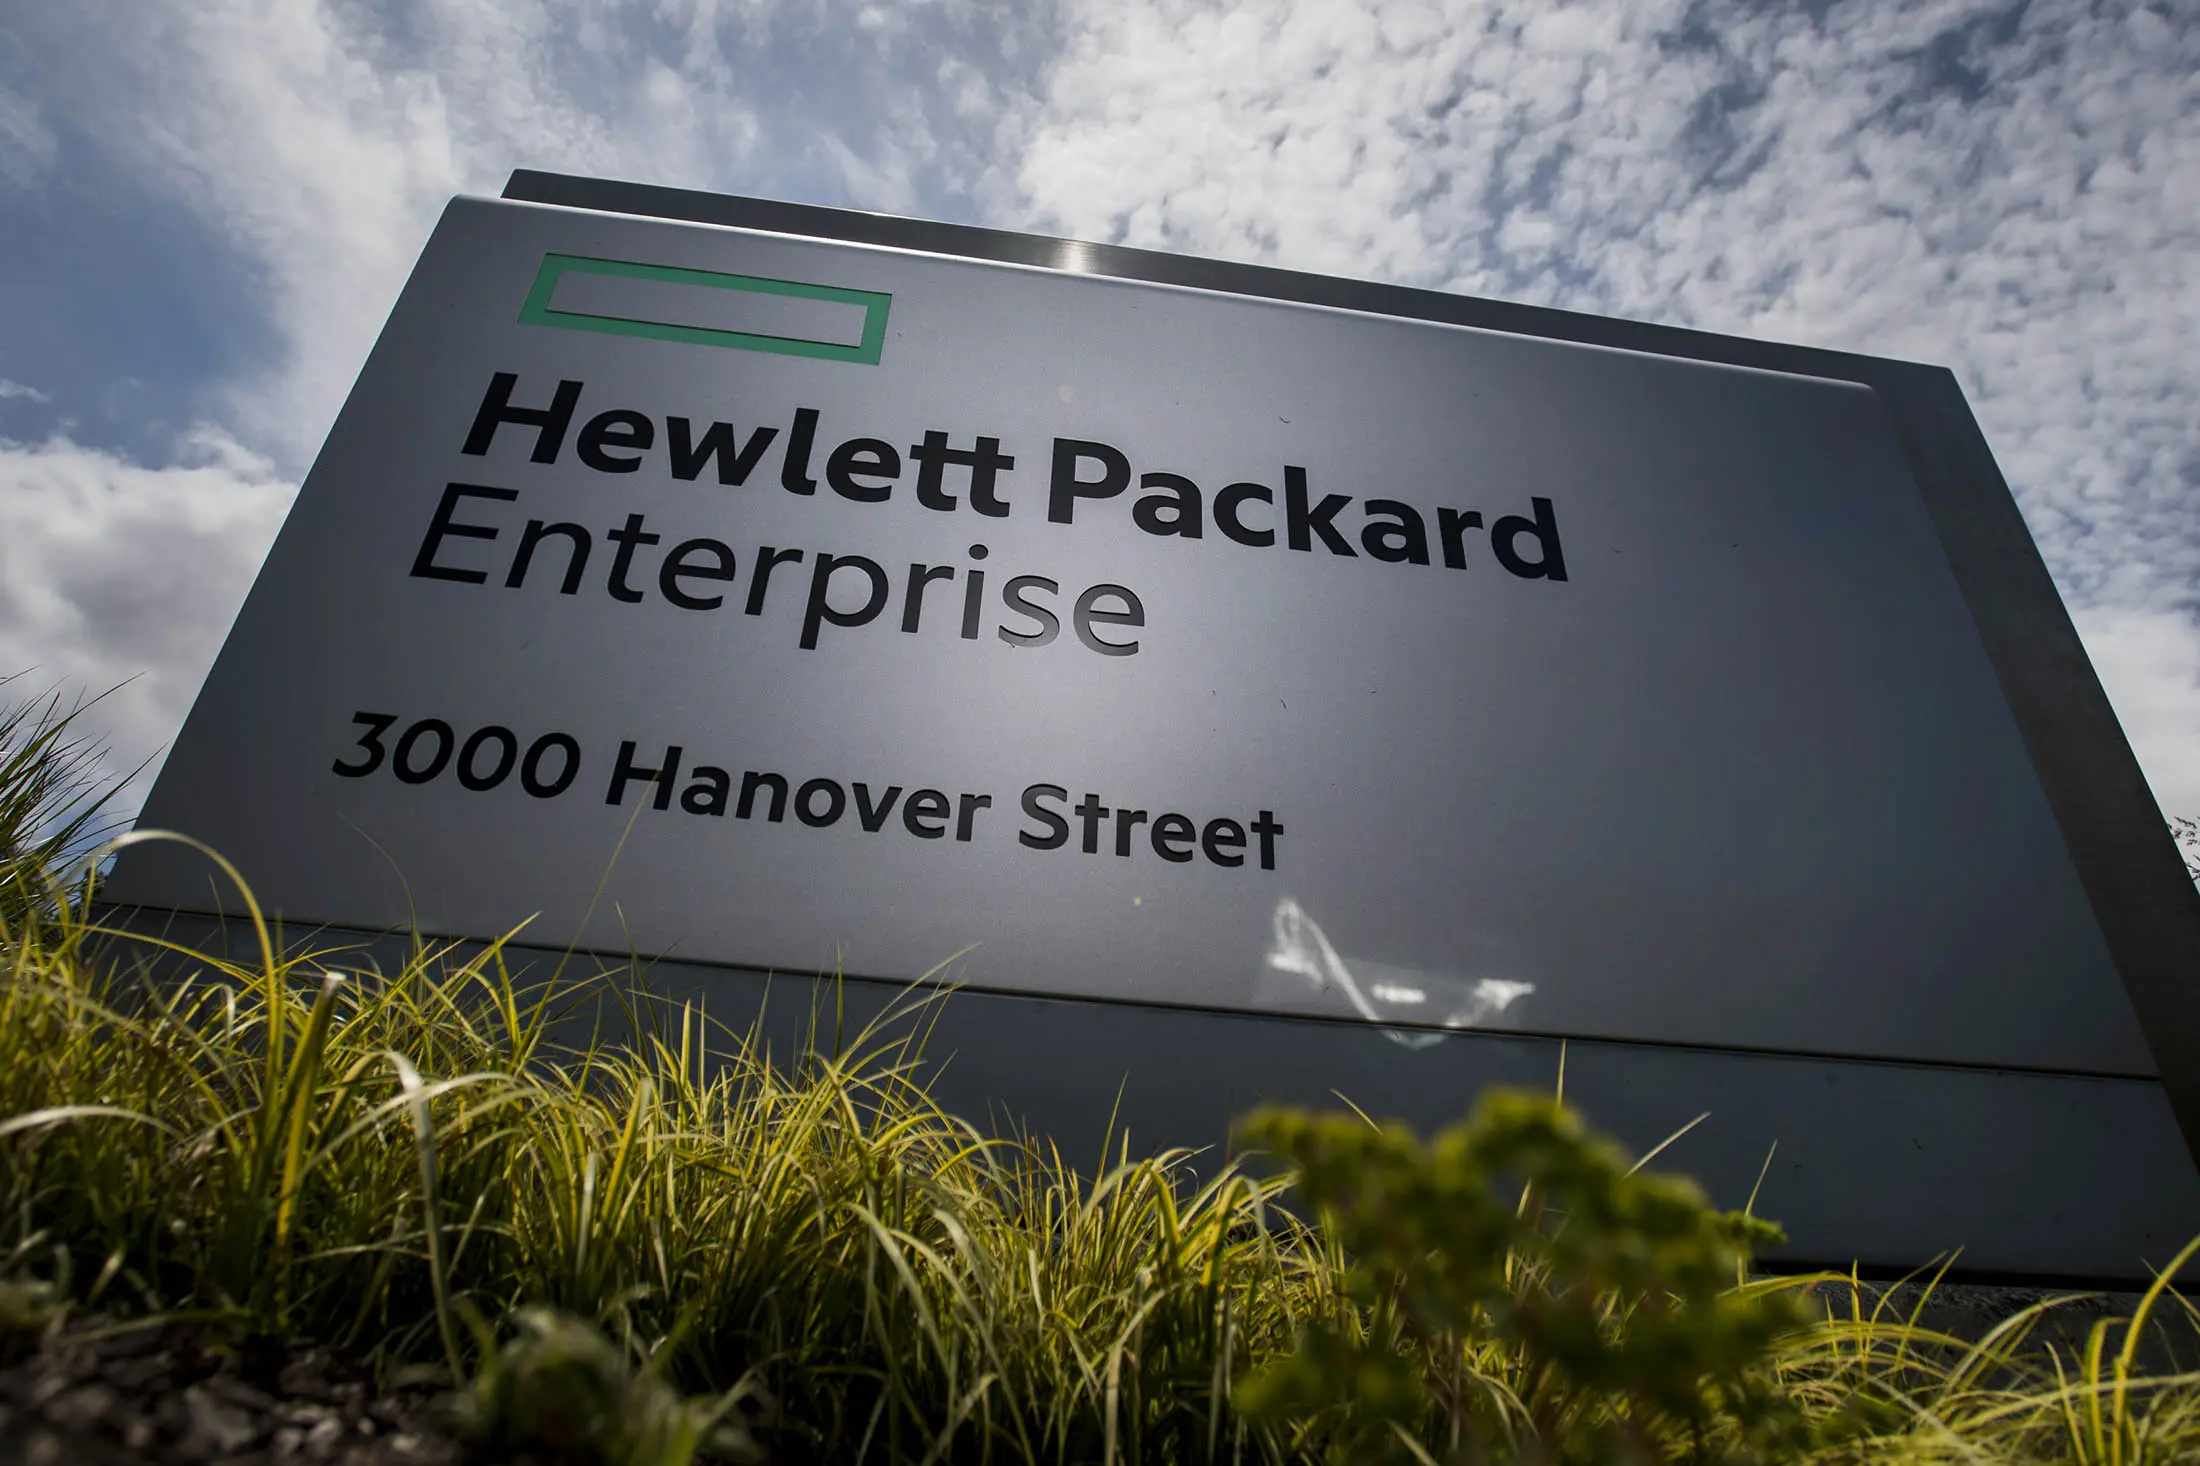 hewlett-packard darkened by microsoft's cloud - What is the revenue of HPE as a service